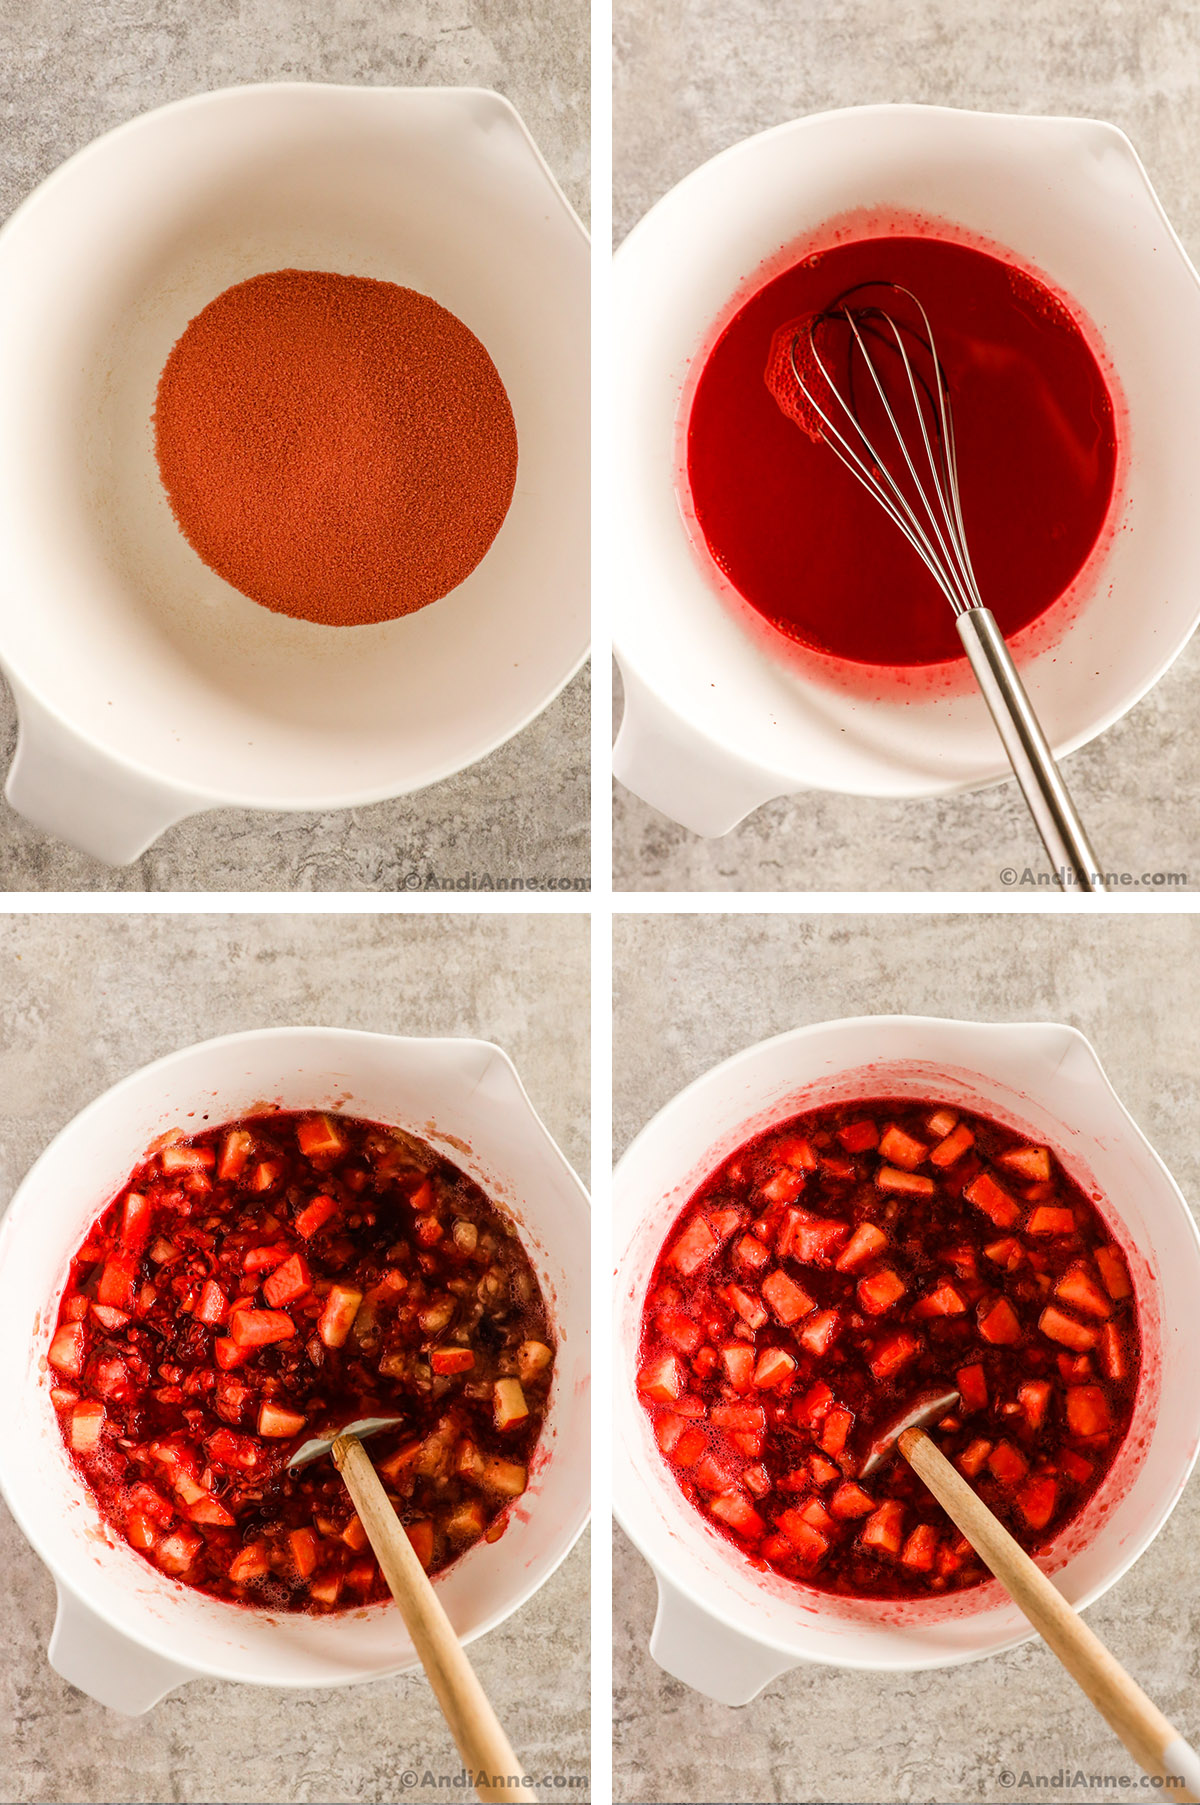 Four images of bowls, first is jello powder, second is red liquid in bowl with a whisk, fourth is chopped apples, pineapple and cranberry sauce. Fourth is cranberry jello salad with chopped apple pieces.